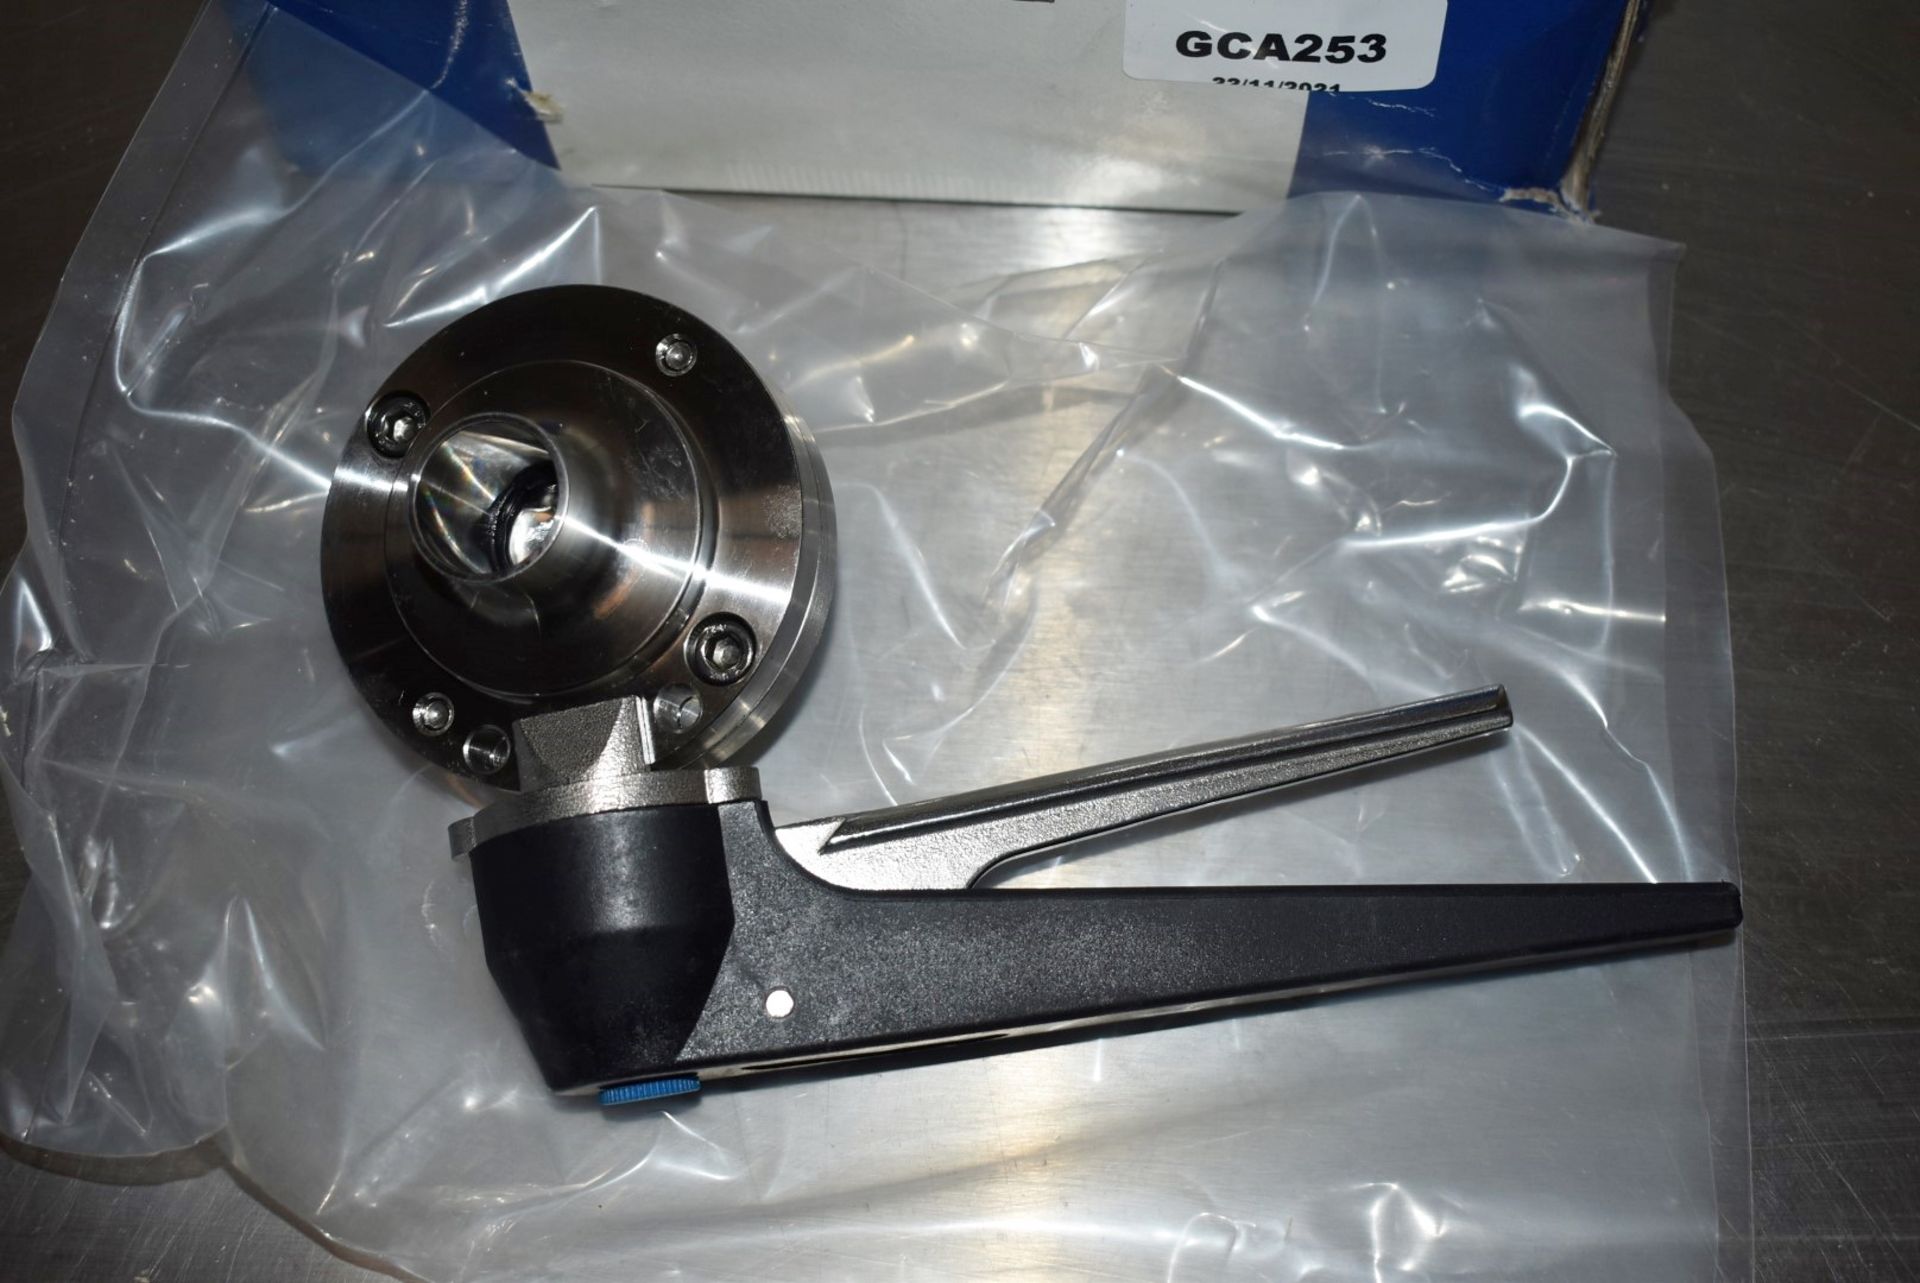 1 x Butterfly Valve - New in Original Box - Model: 3A - Material: 316L - Type: Weld - Size: 1 Inch - - Image 5 of 6